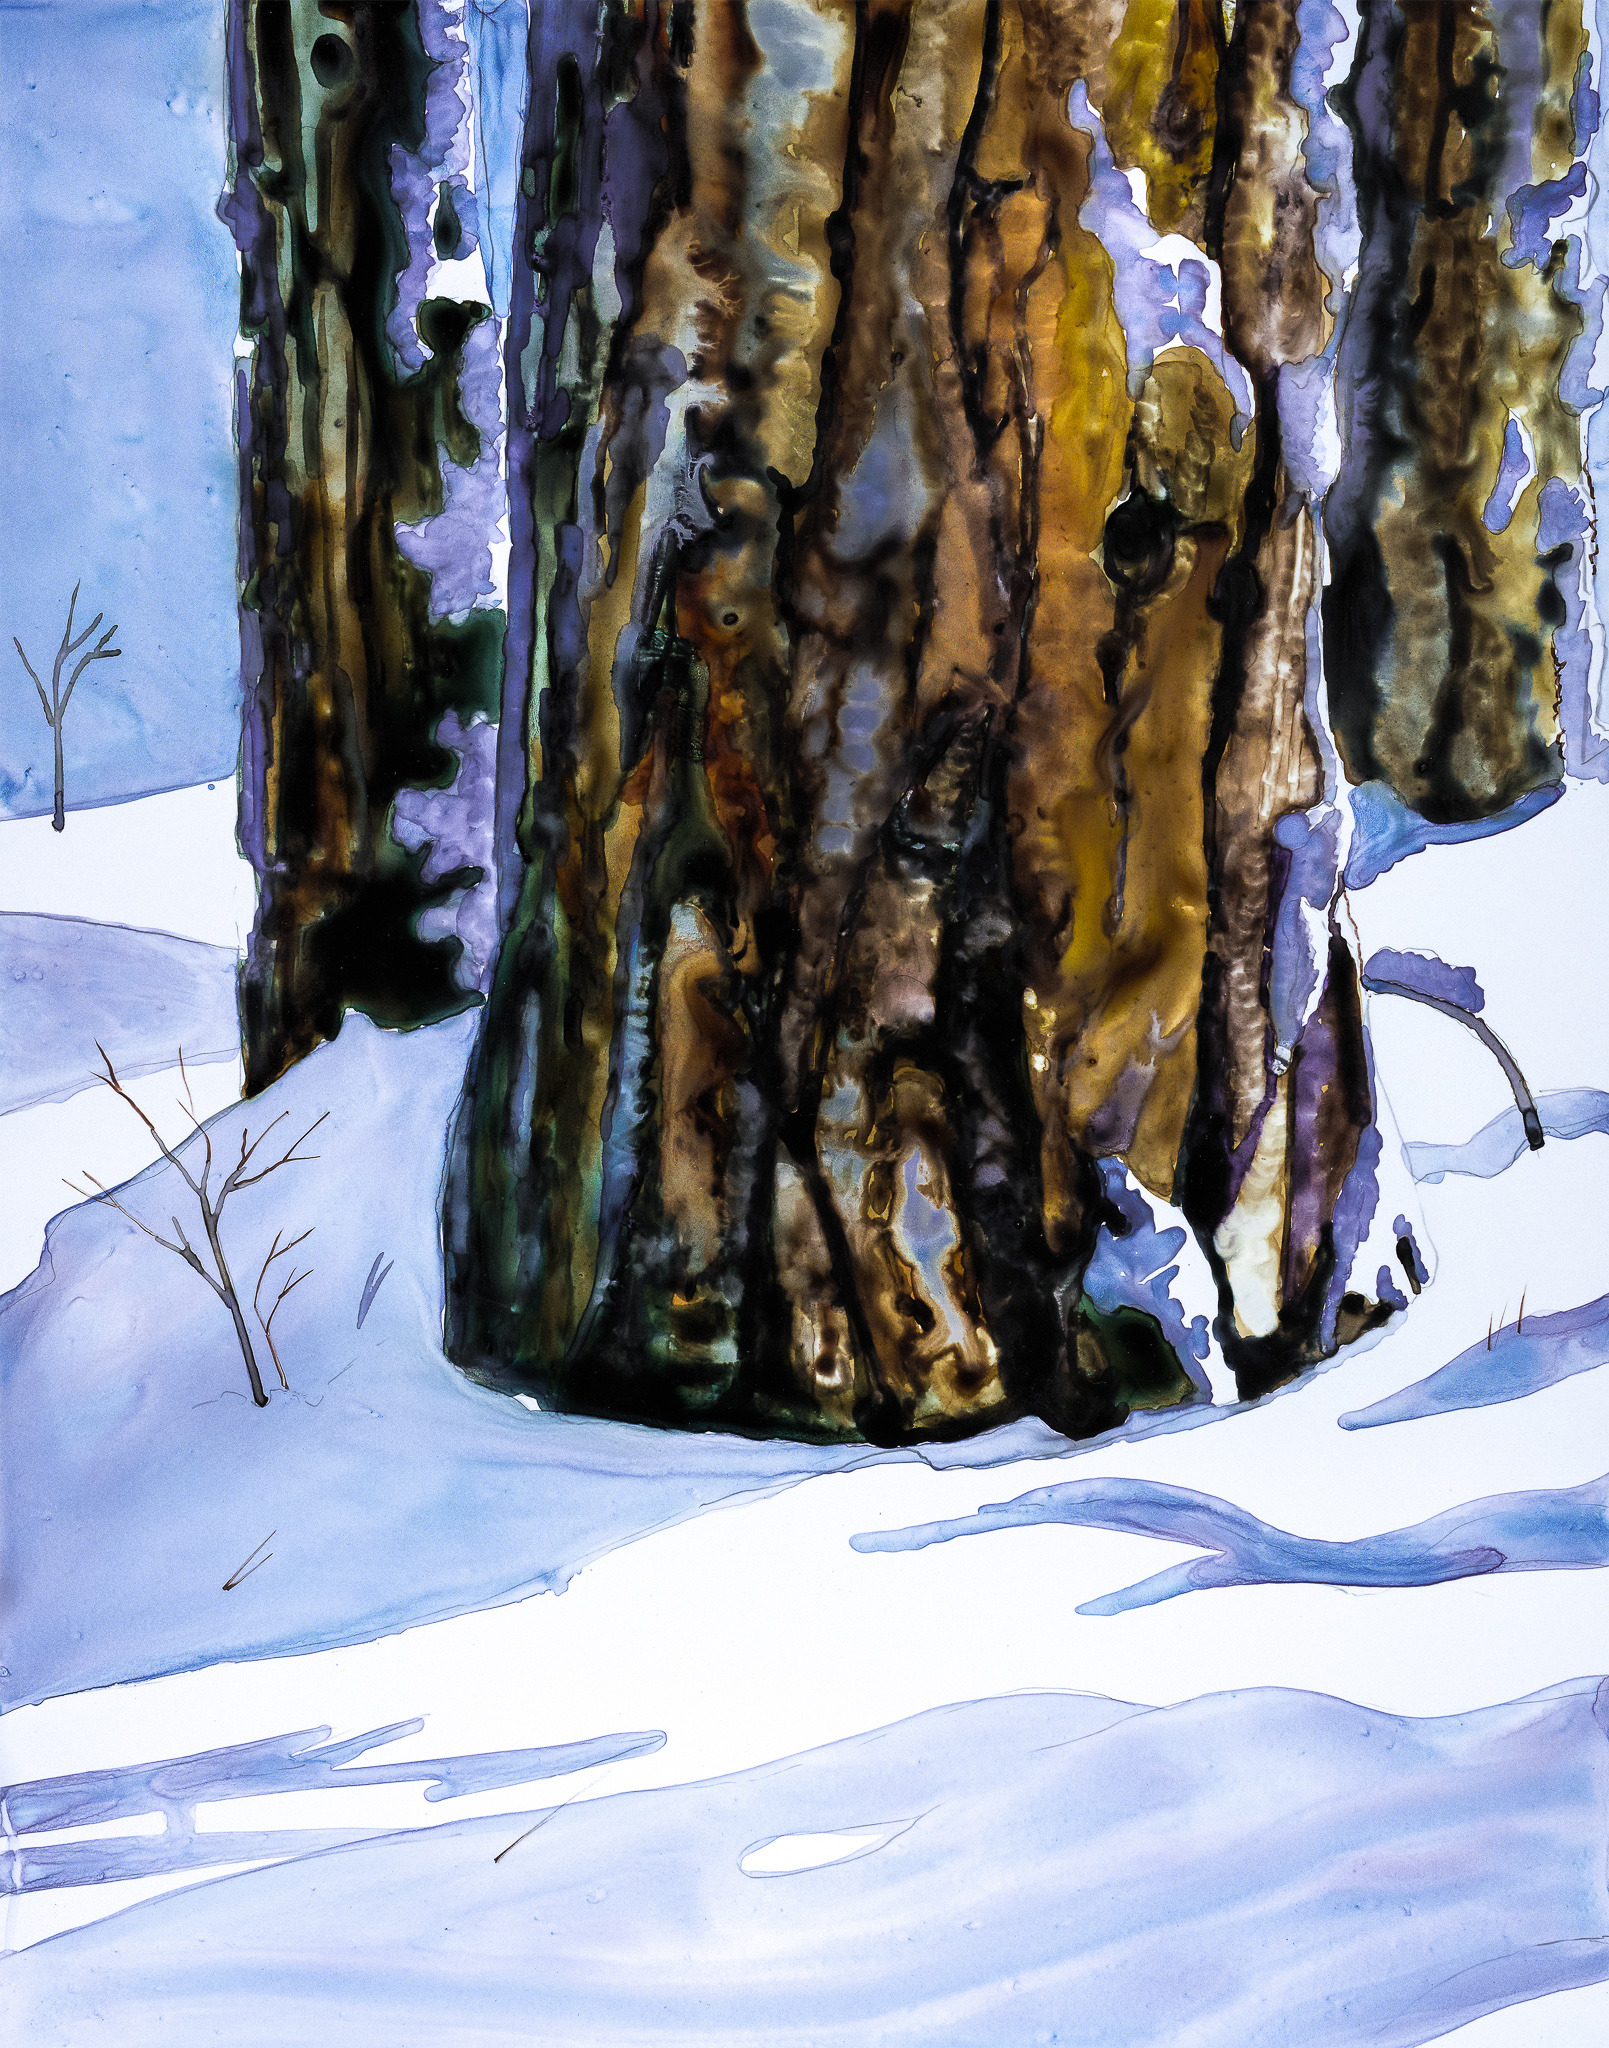 Pines in snow 11x14 lg file 2 vgmht3